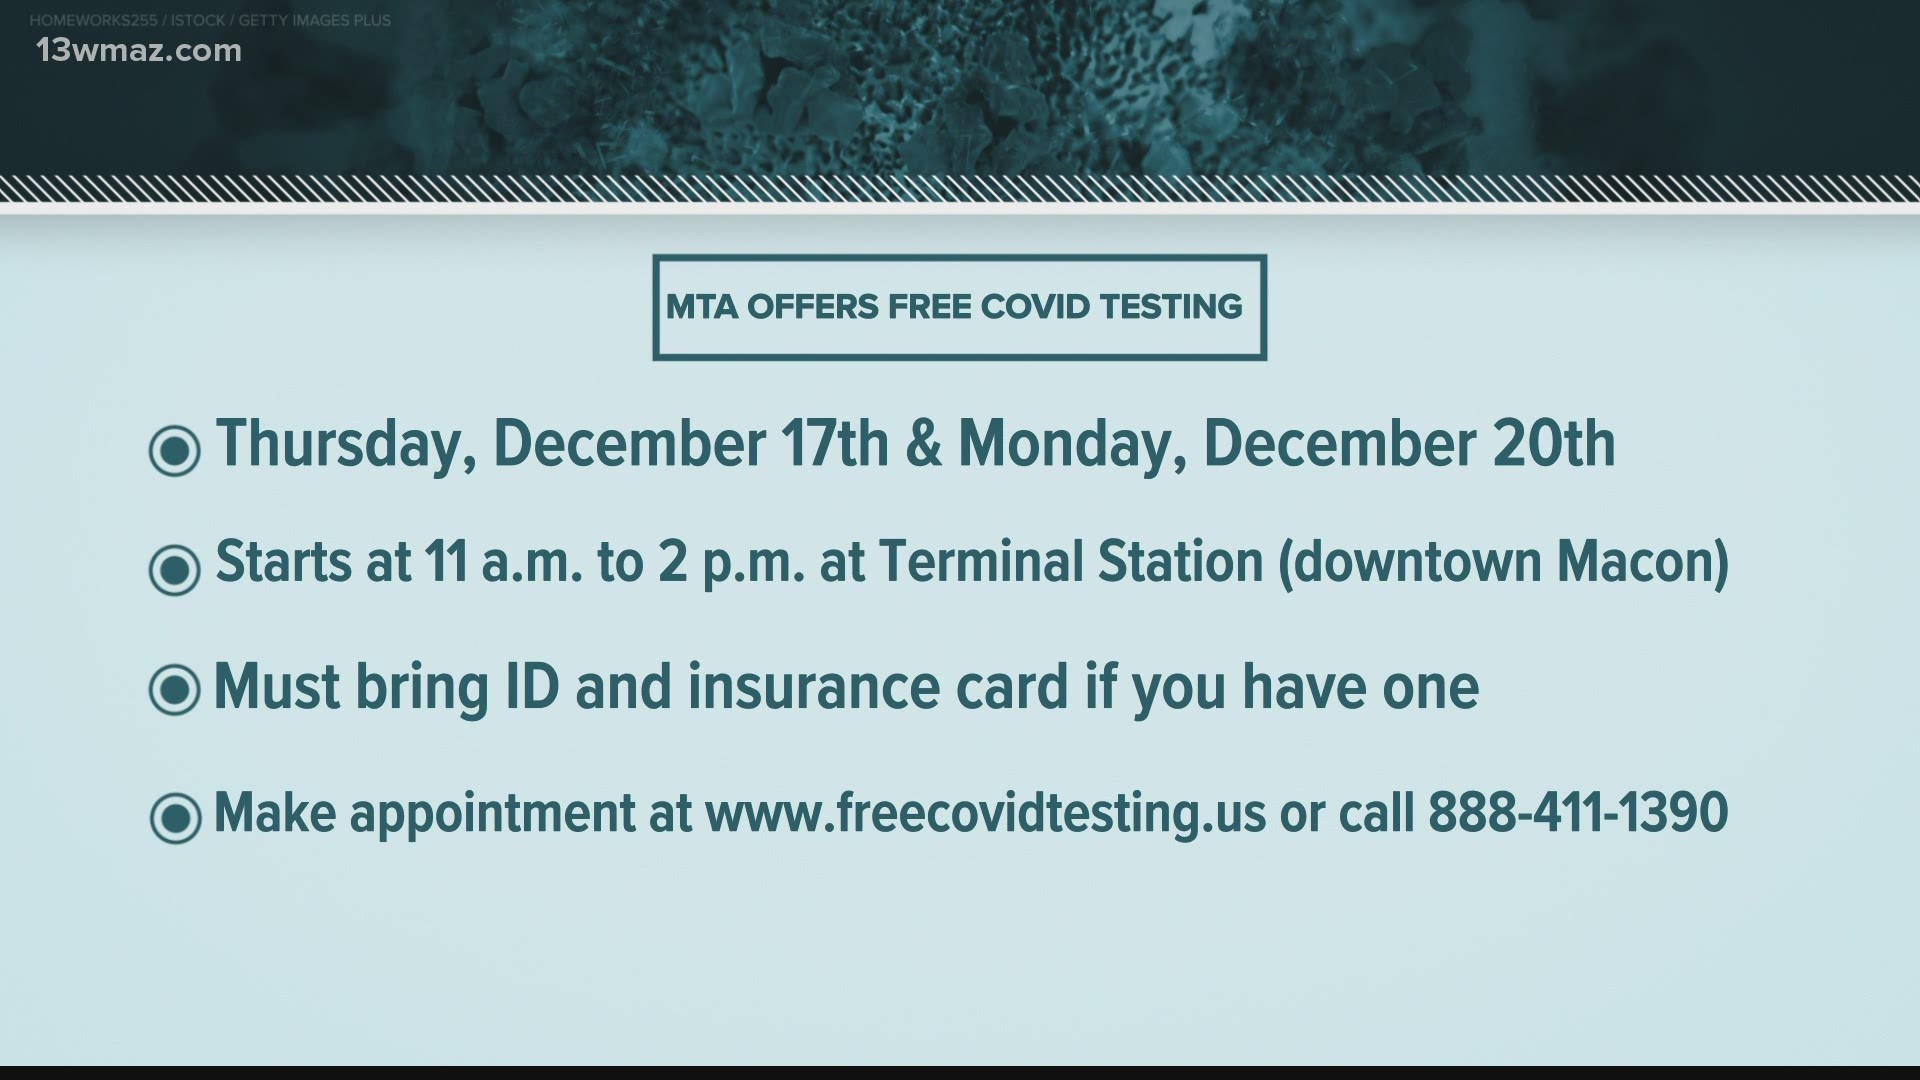 People can get tested for free at Terminal Station in downtown Macon this month